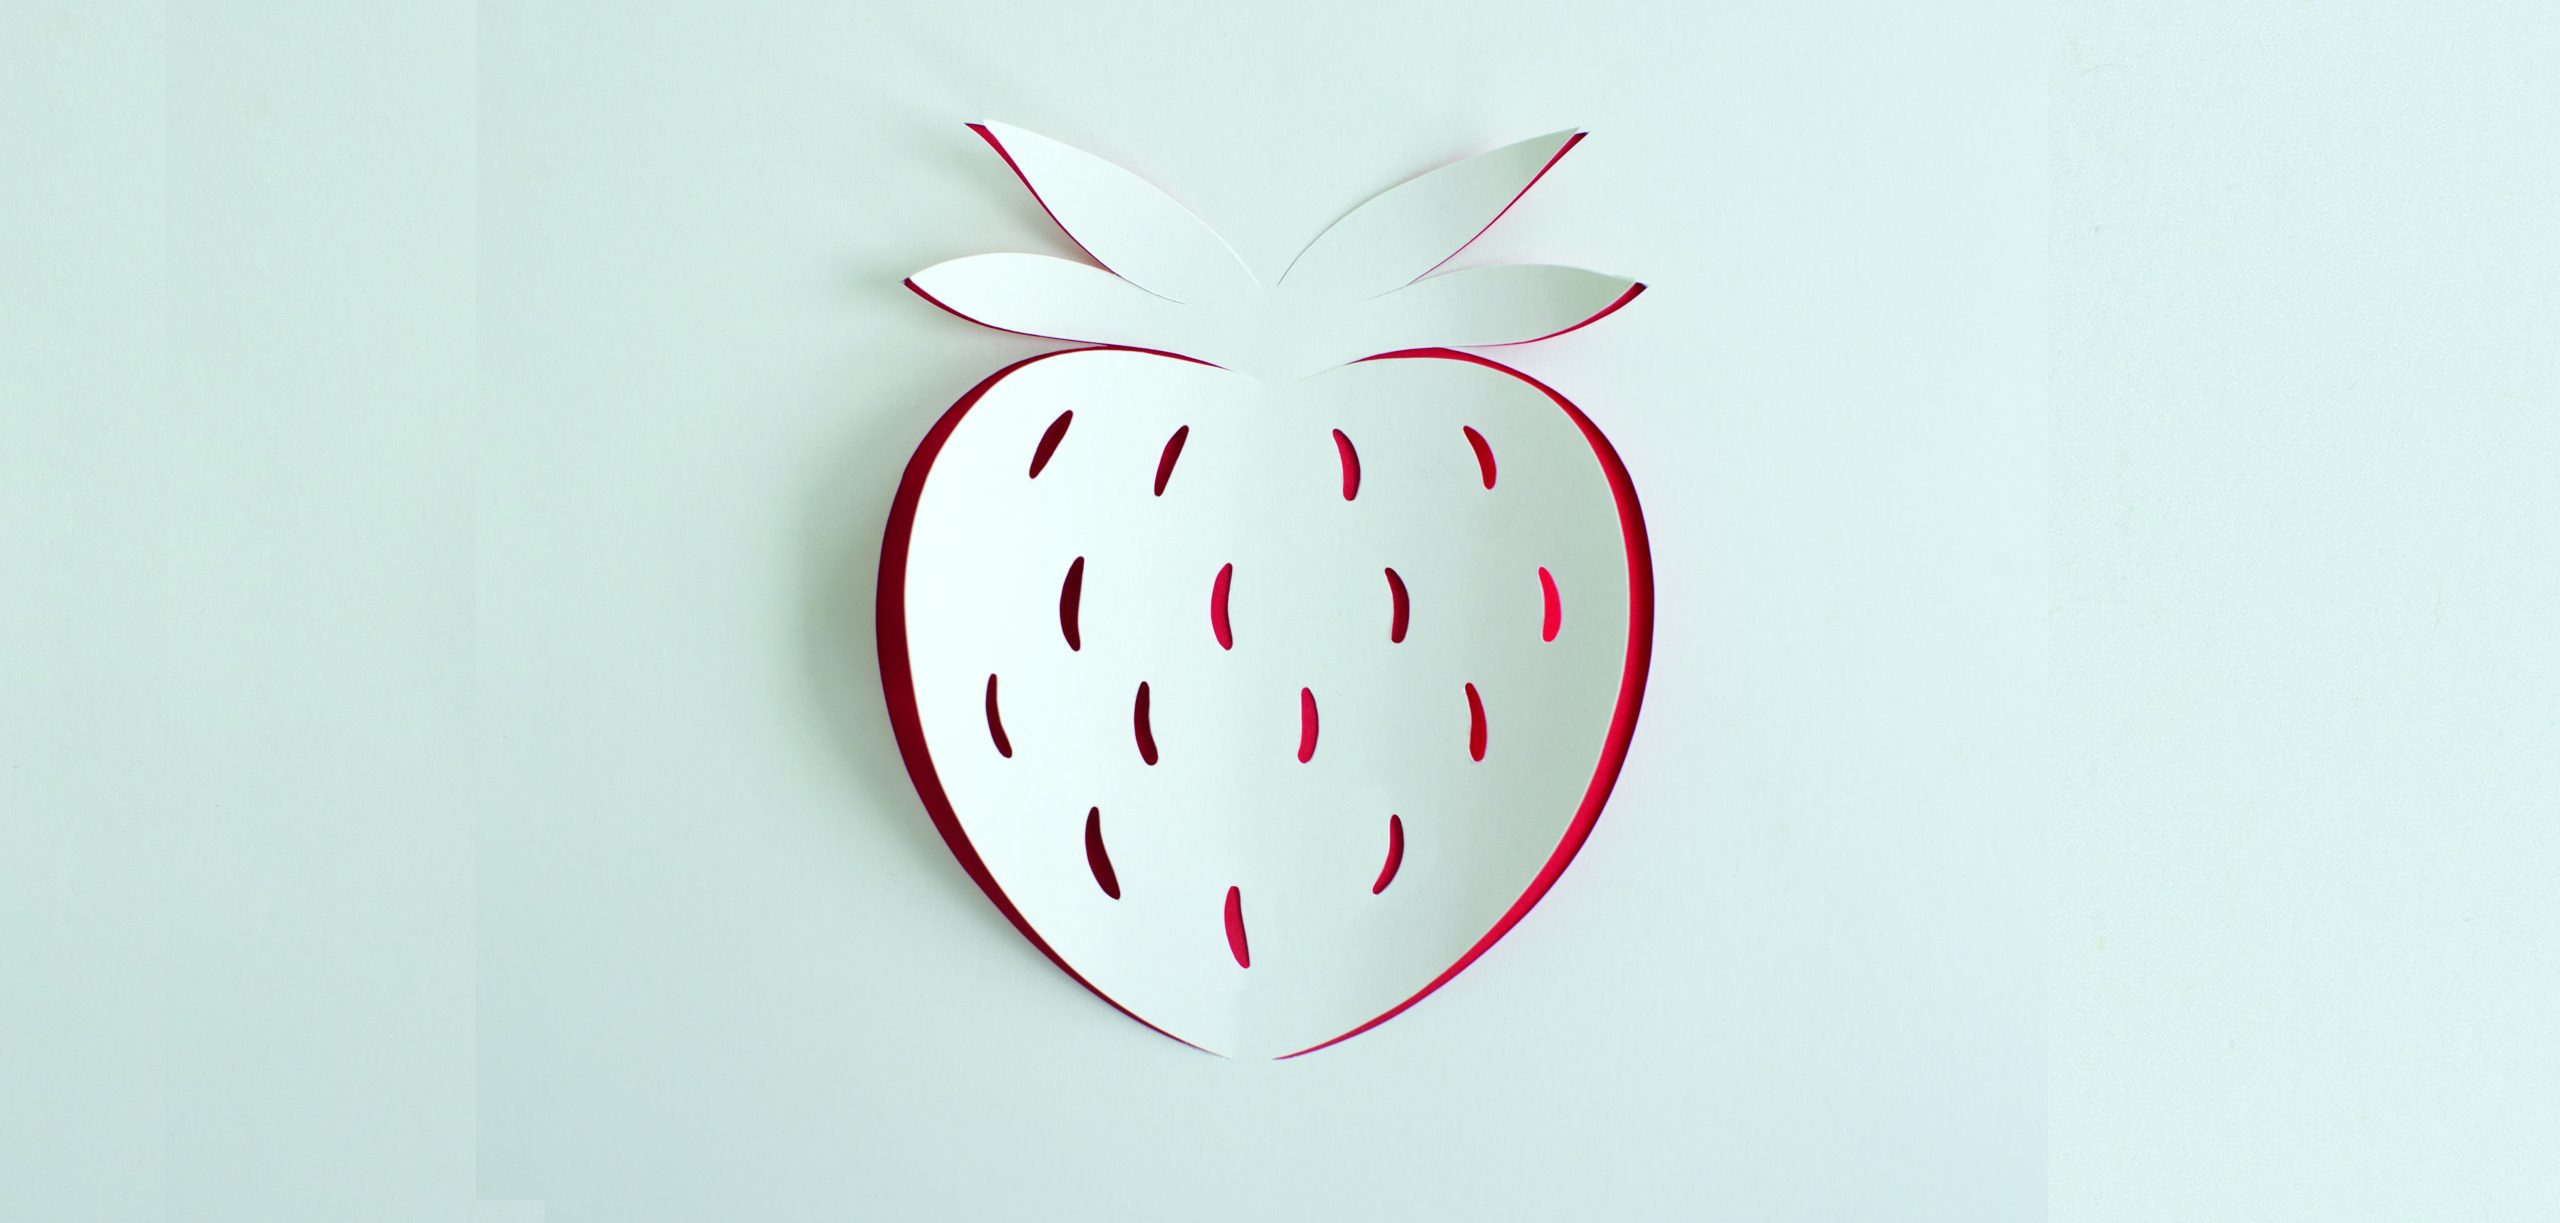 A strawberry design on white paper with red under the cut out strawberry design